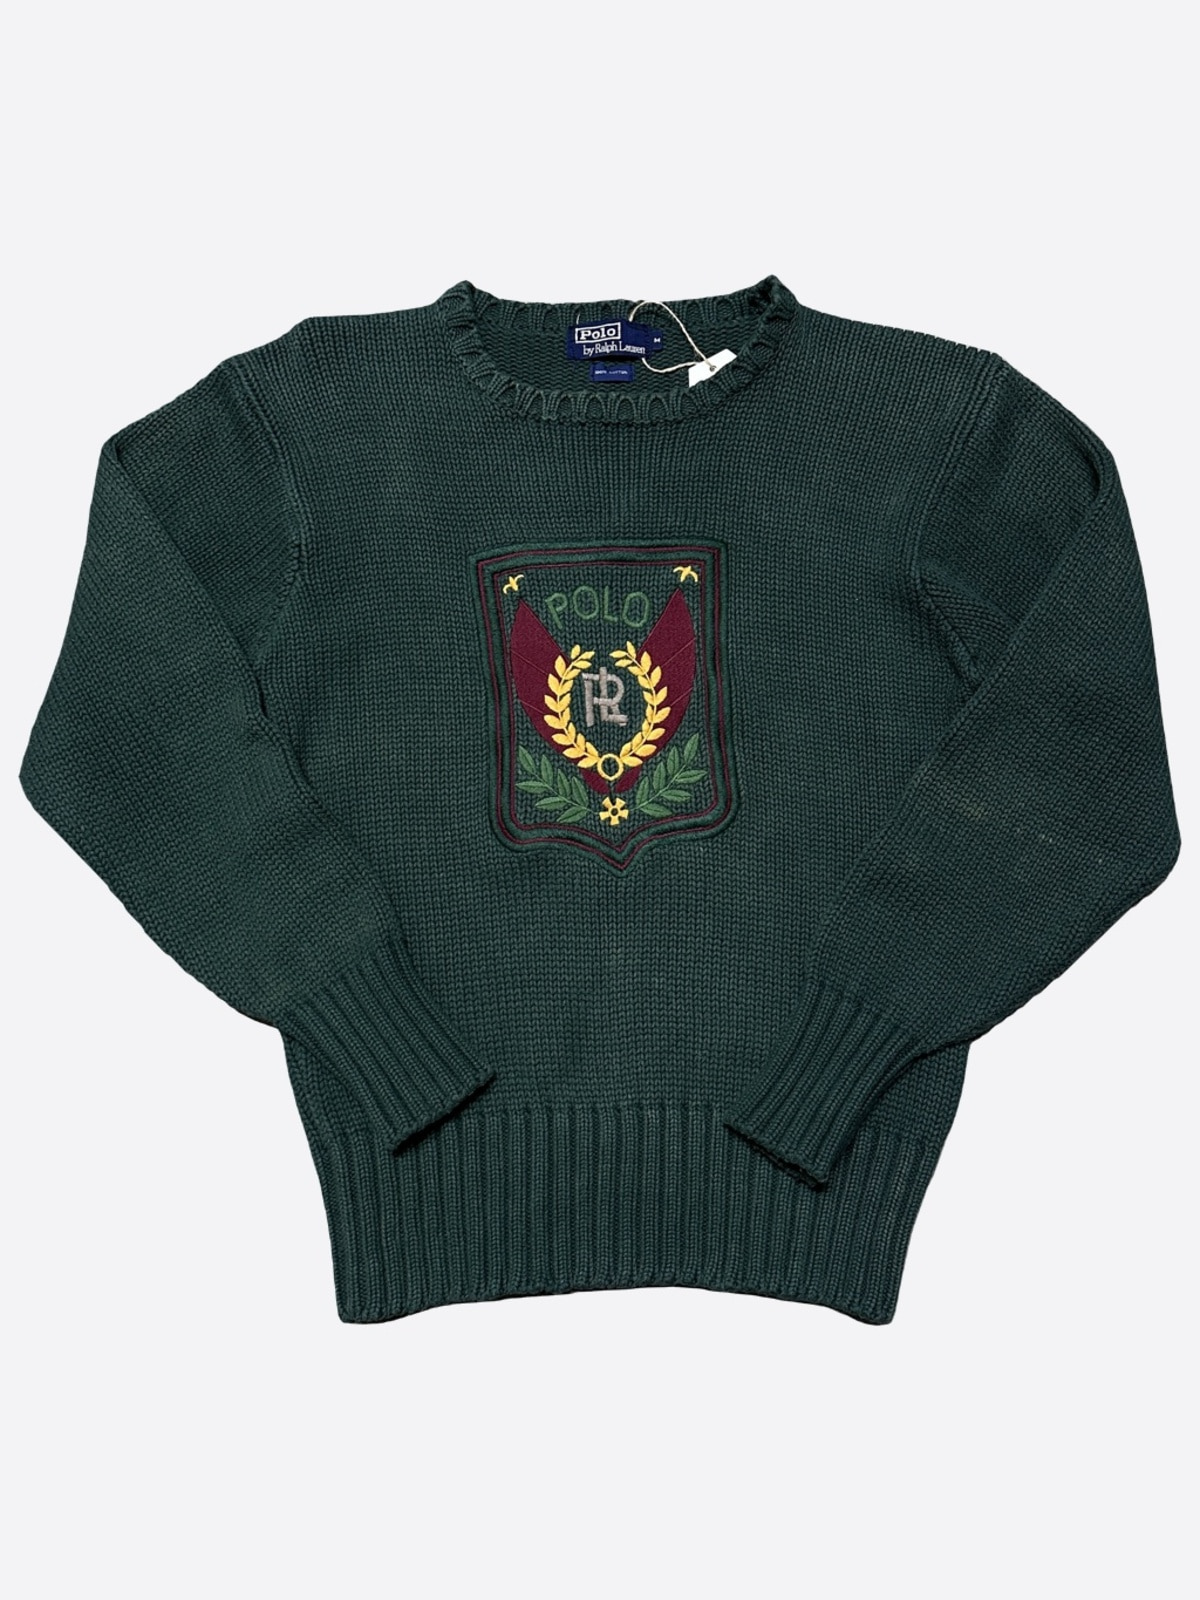 80s Crest Shield Embroidered Sweater (95size) - With Homie 위드호미